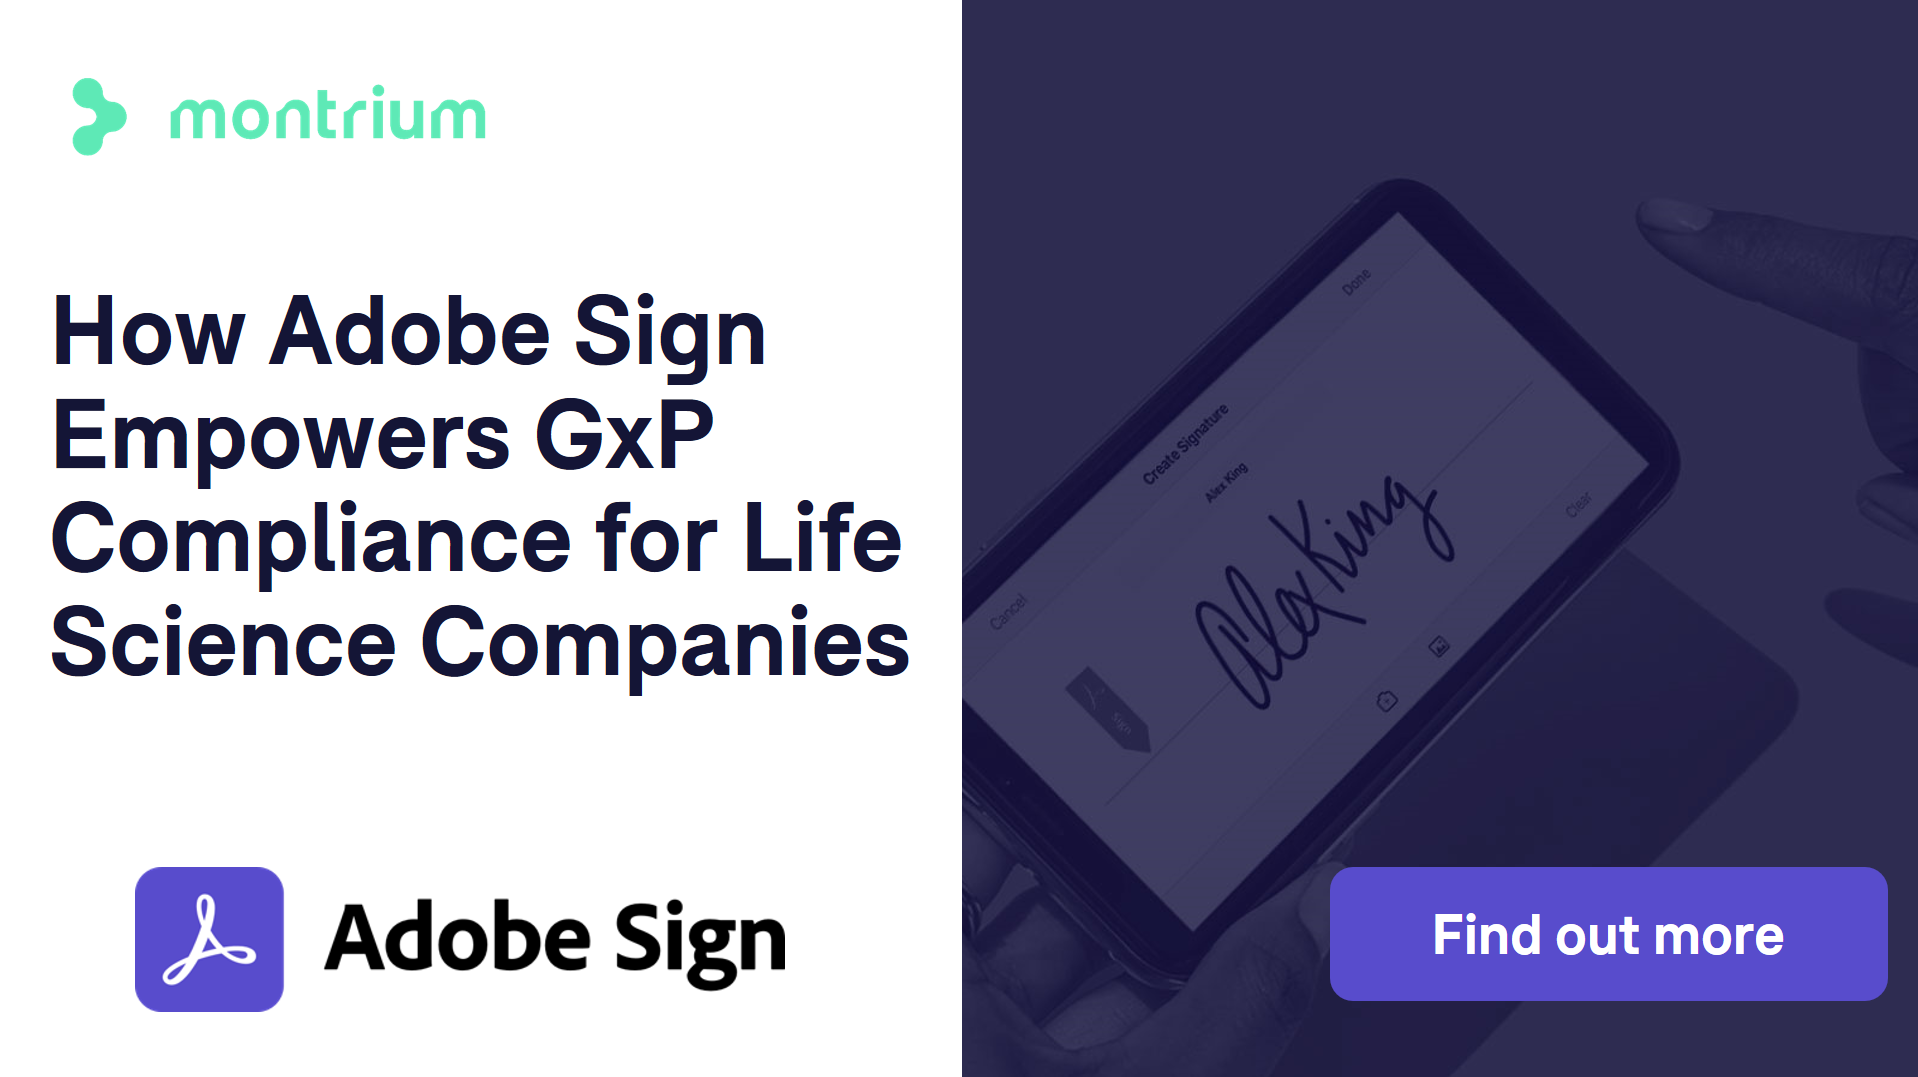 How Adobe Sign Empowers GxP Compliance for Life Science Companies